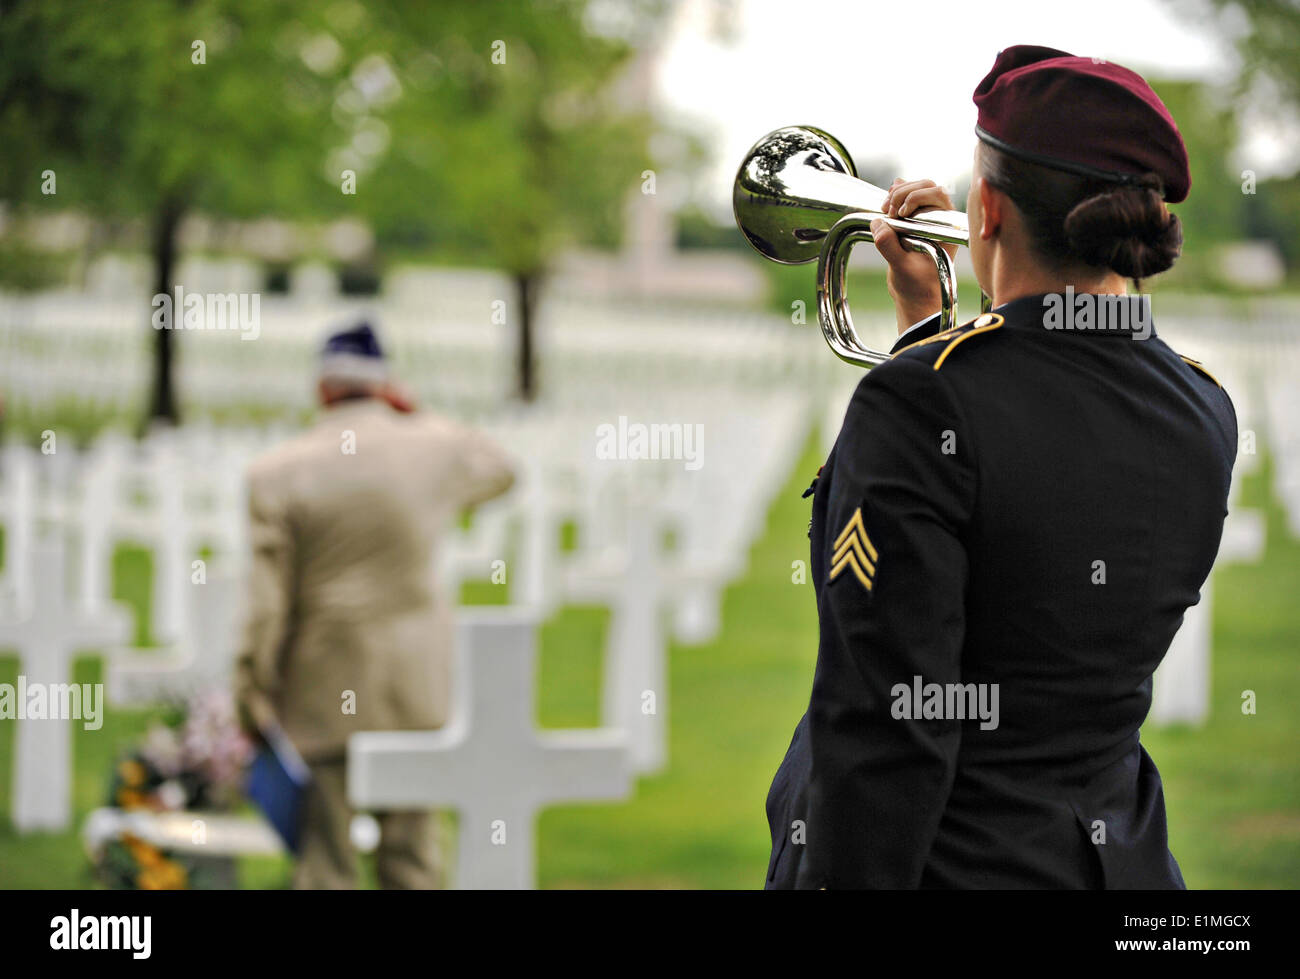 Leslie Cruise, a World War II veteran, salutes the grave of his friend Pvt. Richard Vargas as a US Army plays taps during a wreath laying ceremony at Lorraine American National Cemetery and Memorial June 5, 2014 in St. Avold, France. Seventy years ago on June 7, 1944 Pvt. Richard Vargas saved Cruise’s life during the invasion of Normandy. Stock Photo